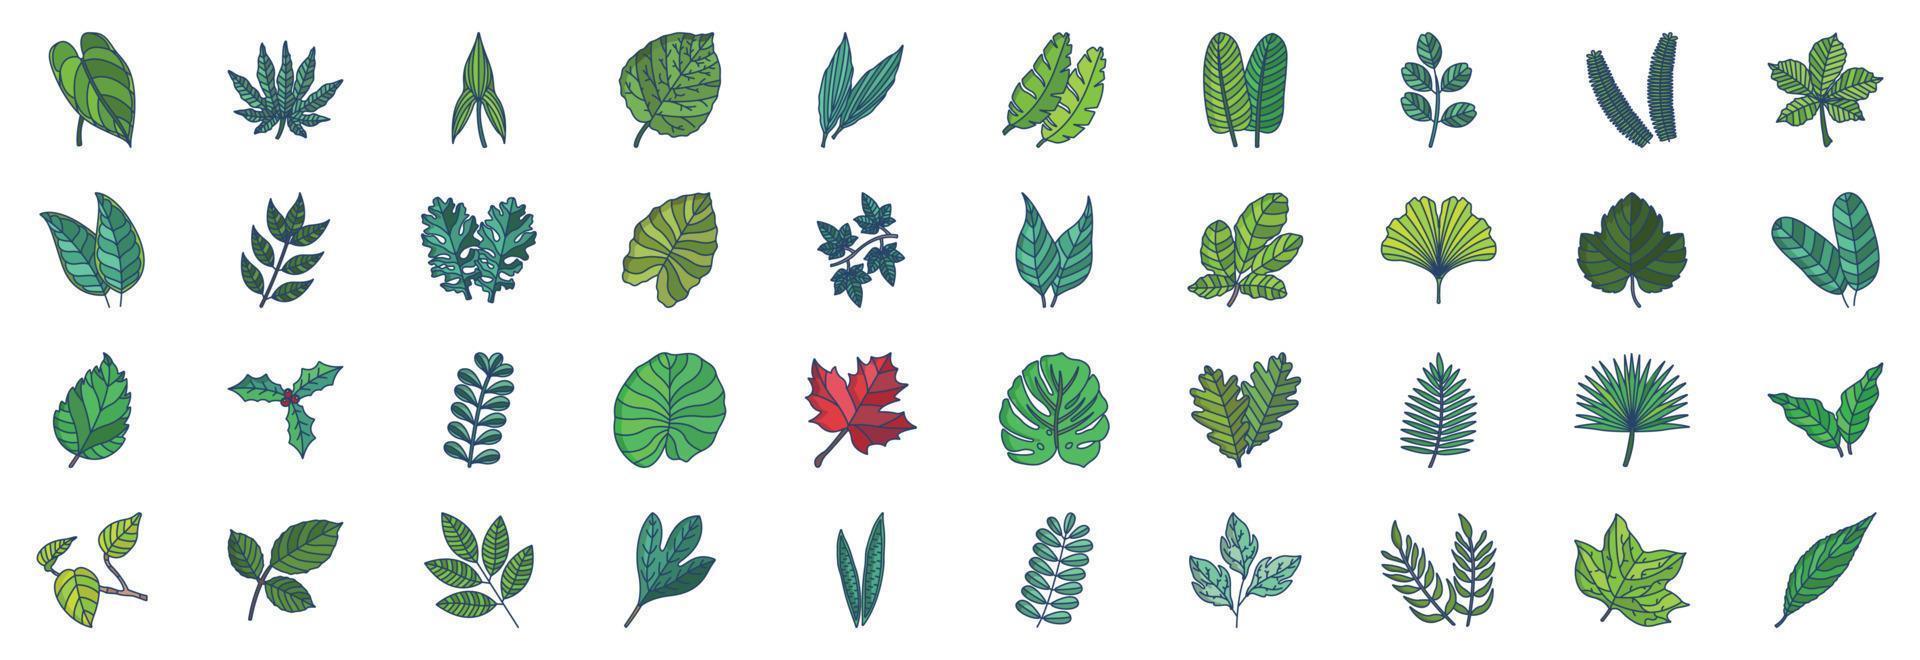 Collection of icons related to Leaves, including icons like Anthurium, Aralia, Aspidistra, Chestnut, Citrus and more. vector illustrations, Pixel Perfect set